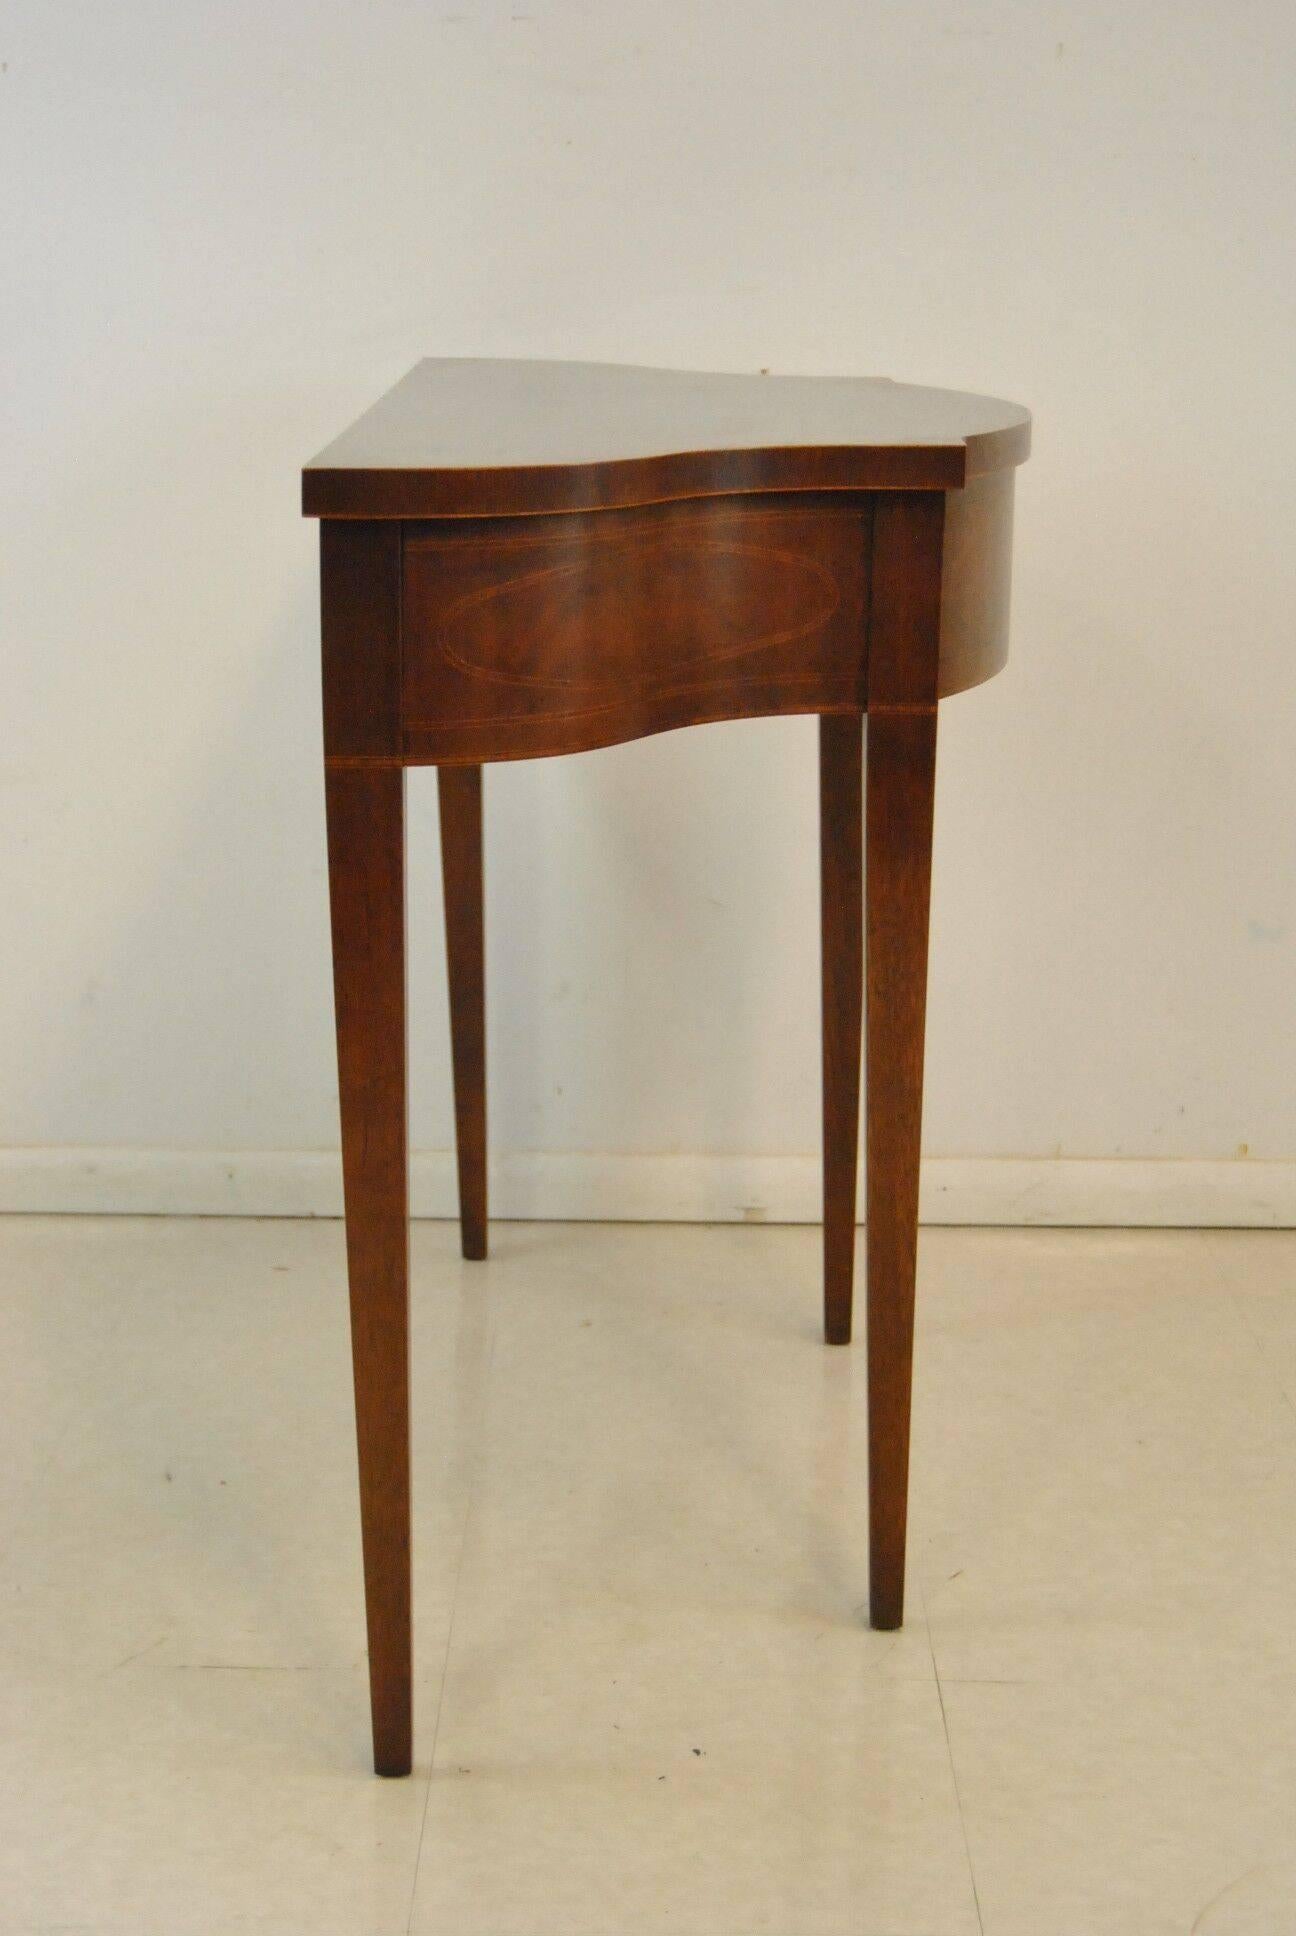 American Inlay Console Table by Baker Furniture from the Historic Charleston Collection